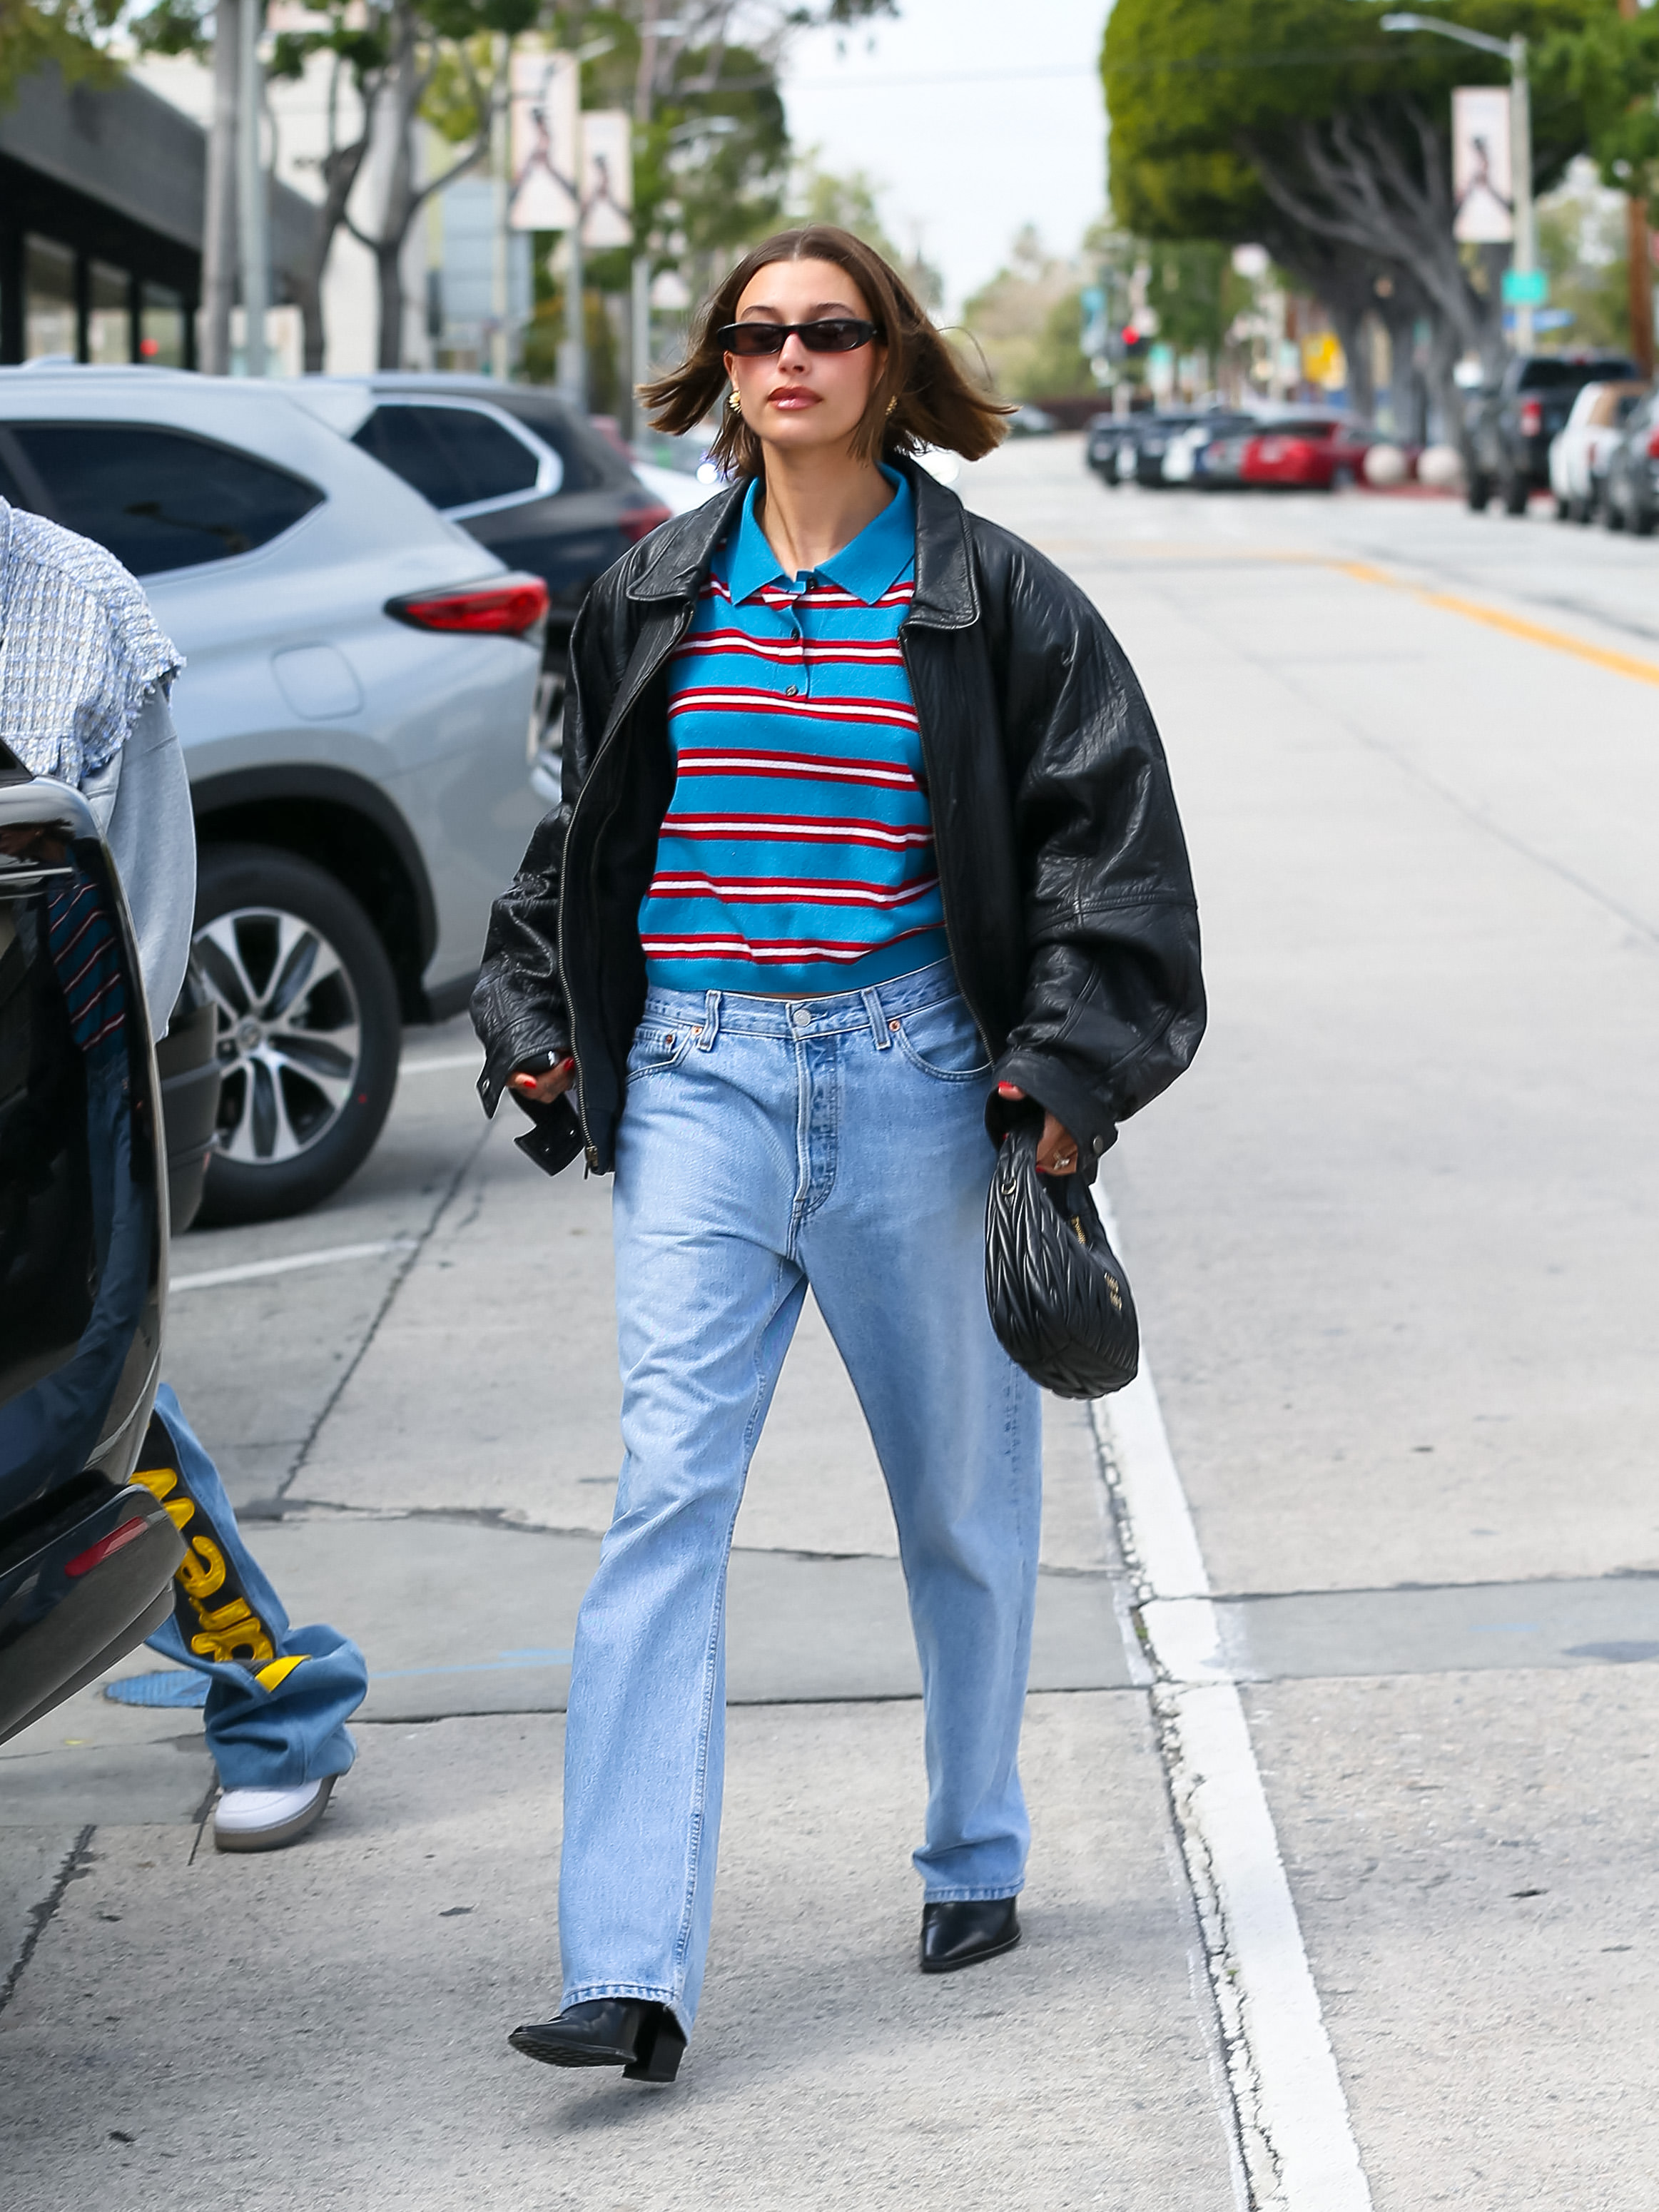 Loewe Rugby Top: Hailey Bieber wears the cult piece with loose-fit jeans and a black leather jacket